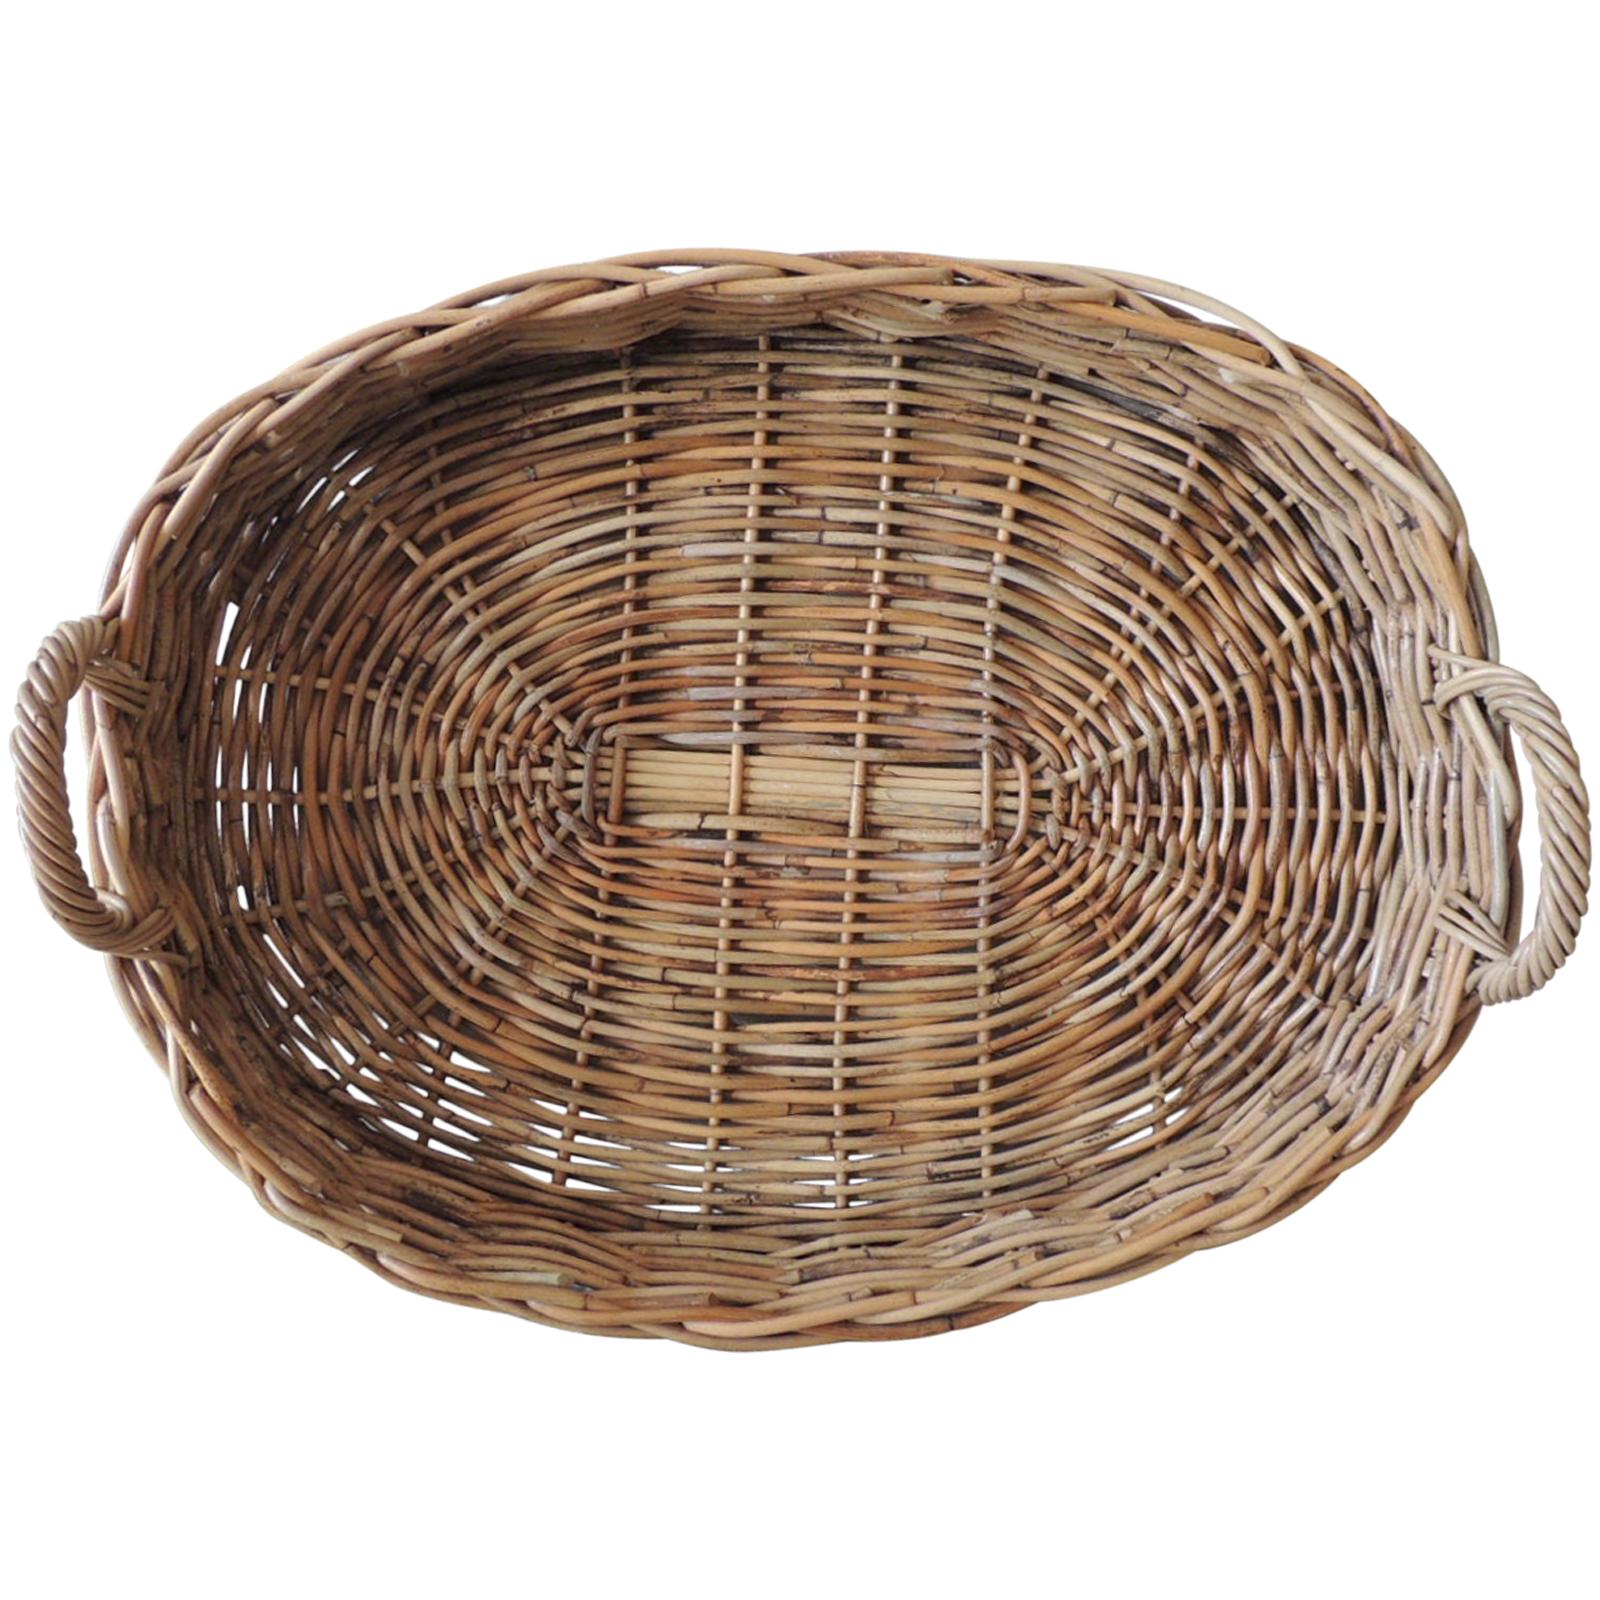 Vintage Large Oval Farm Table Woven Basket with Handles